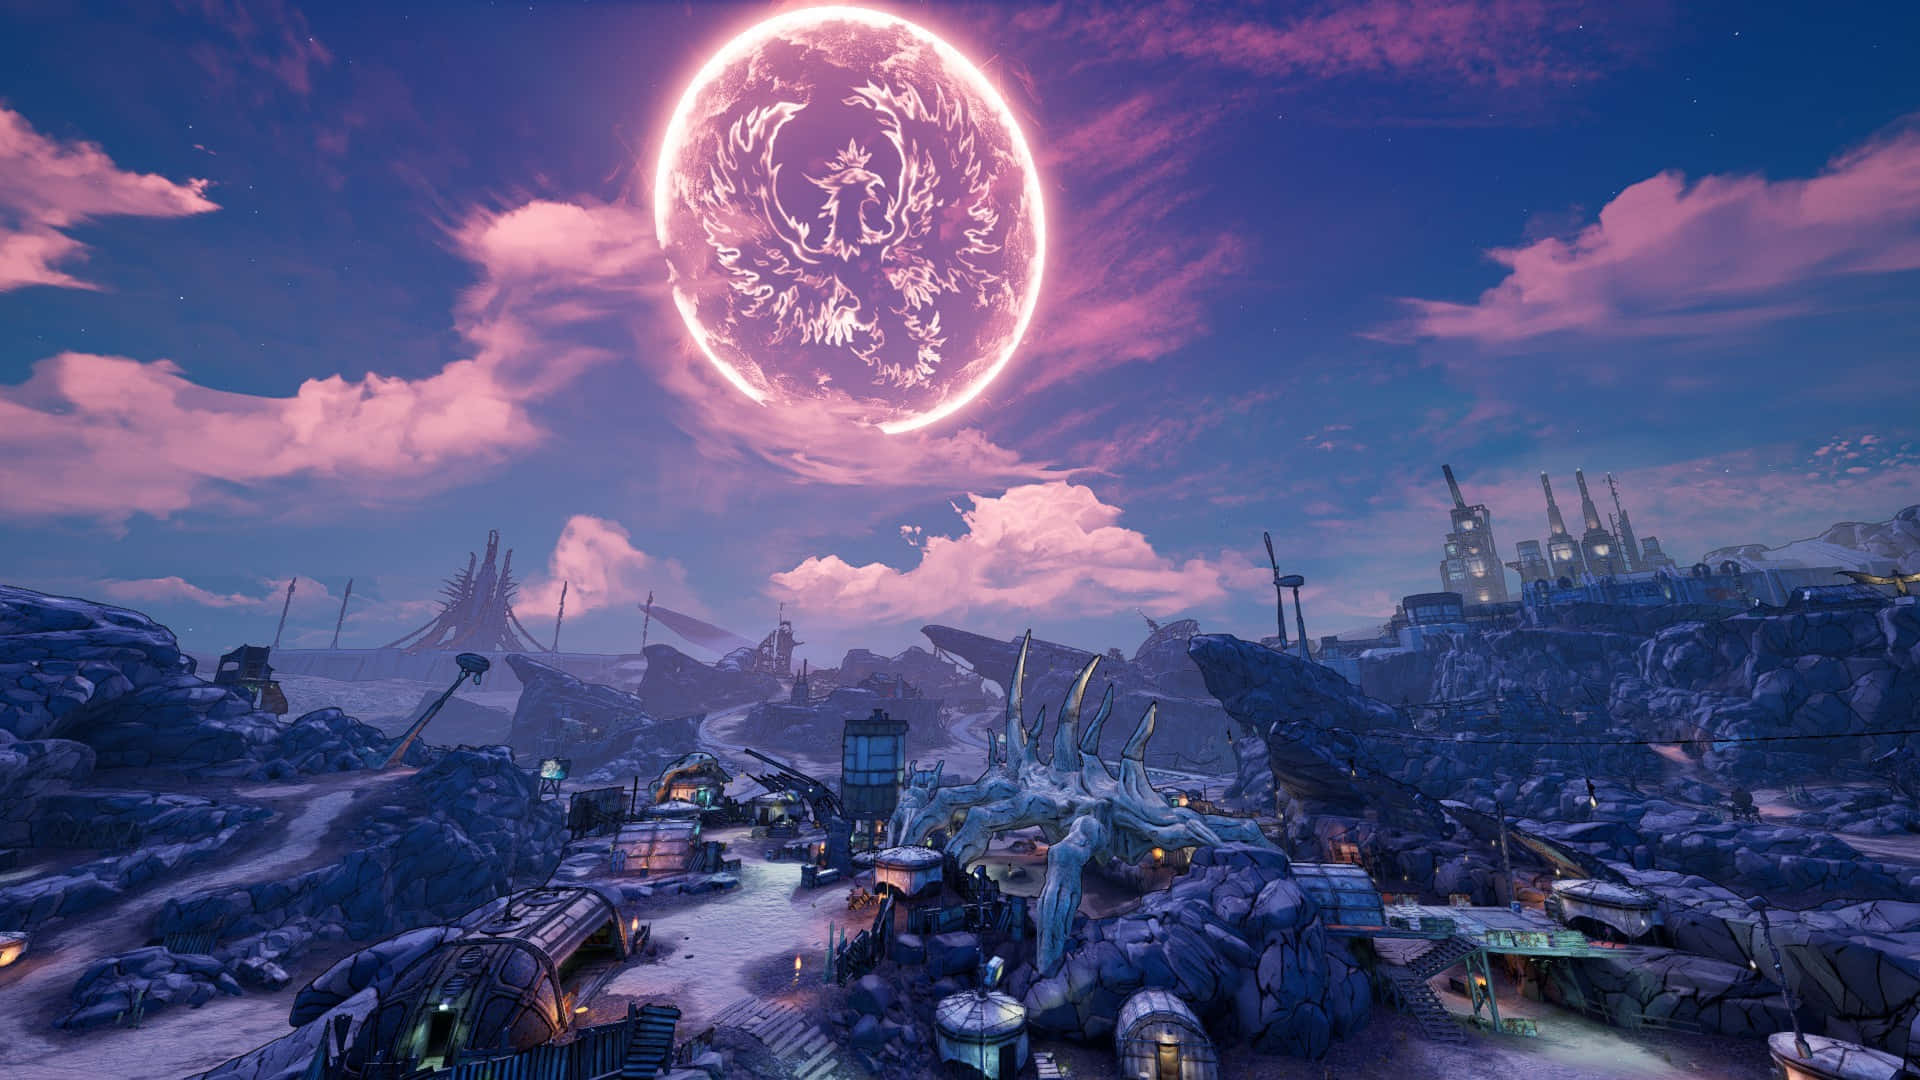 Get ready for an intense RPG experience with HD visuals in Borderlands 3